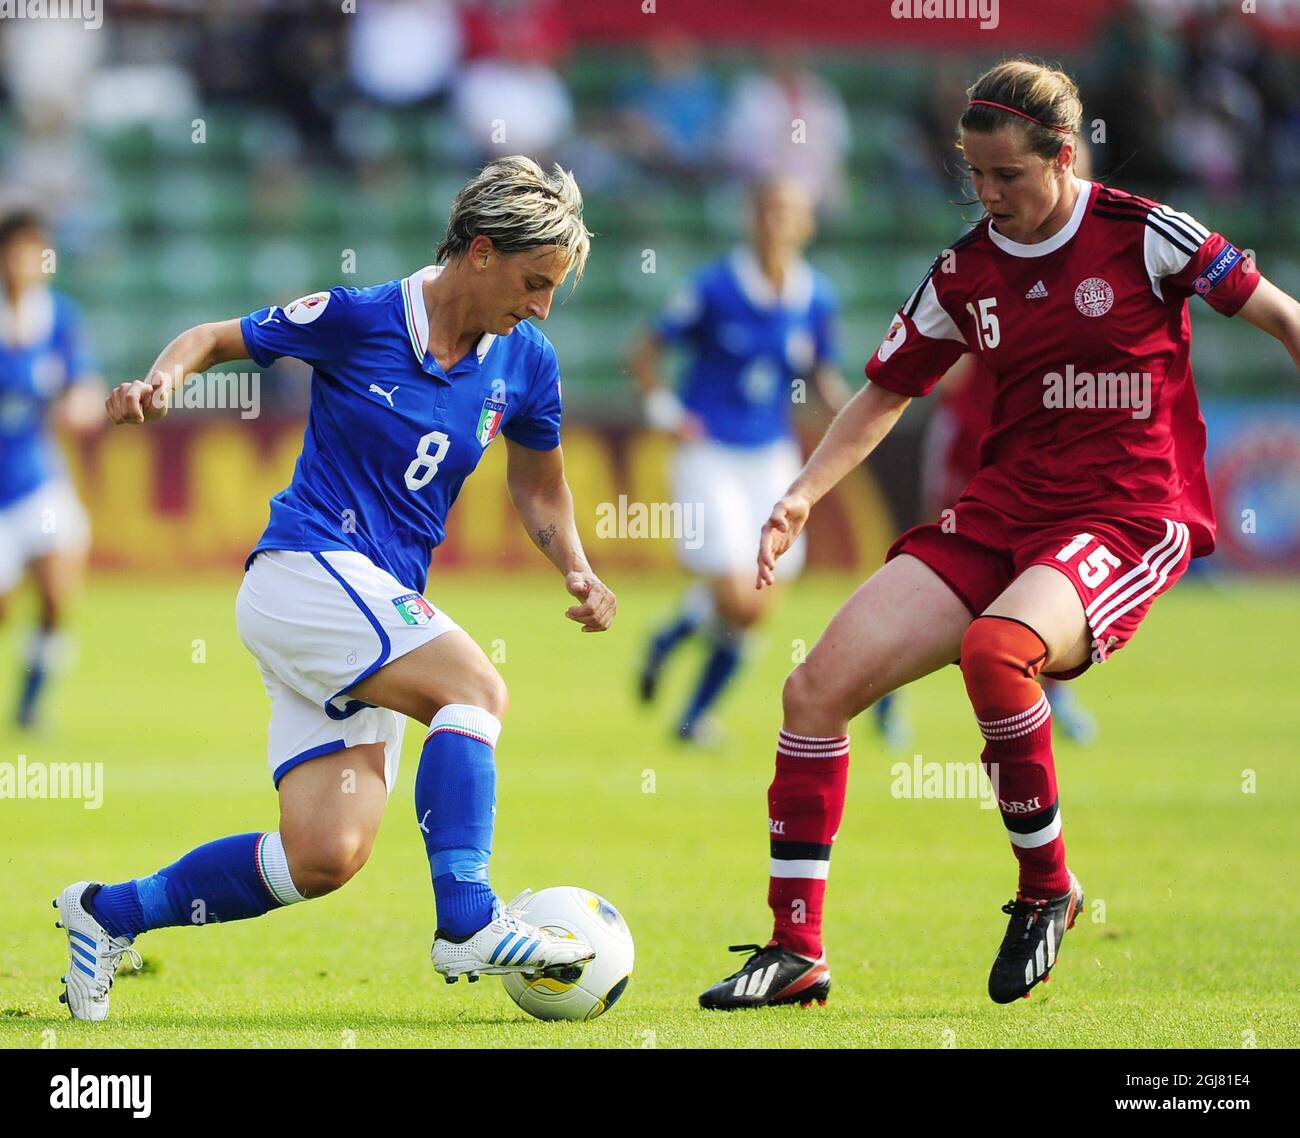 HALMSTAD 2013-07-13 Italy's Melania Gabbiadini, left, vies with Denmark's Sofie Pedersen during the UEFA Women's EURO 2013 group A soccer match between Denmark and Italy at Orjans vall in Halmstad, Sweden, on July 13, 2013. Photo: Bjorn Lindgren / SCANPIX / code 9204  Stock Photo